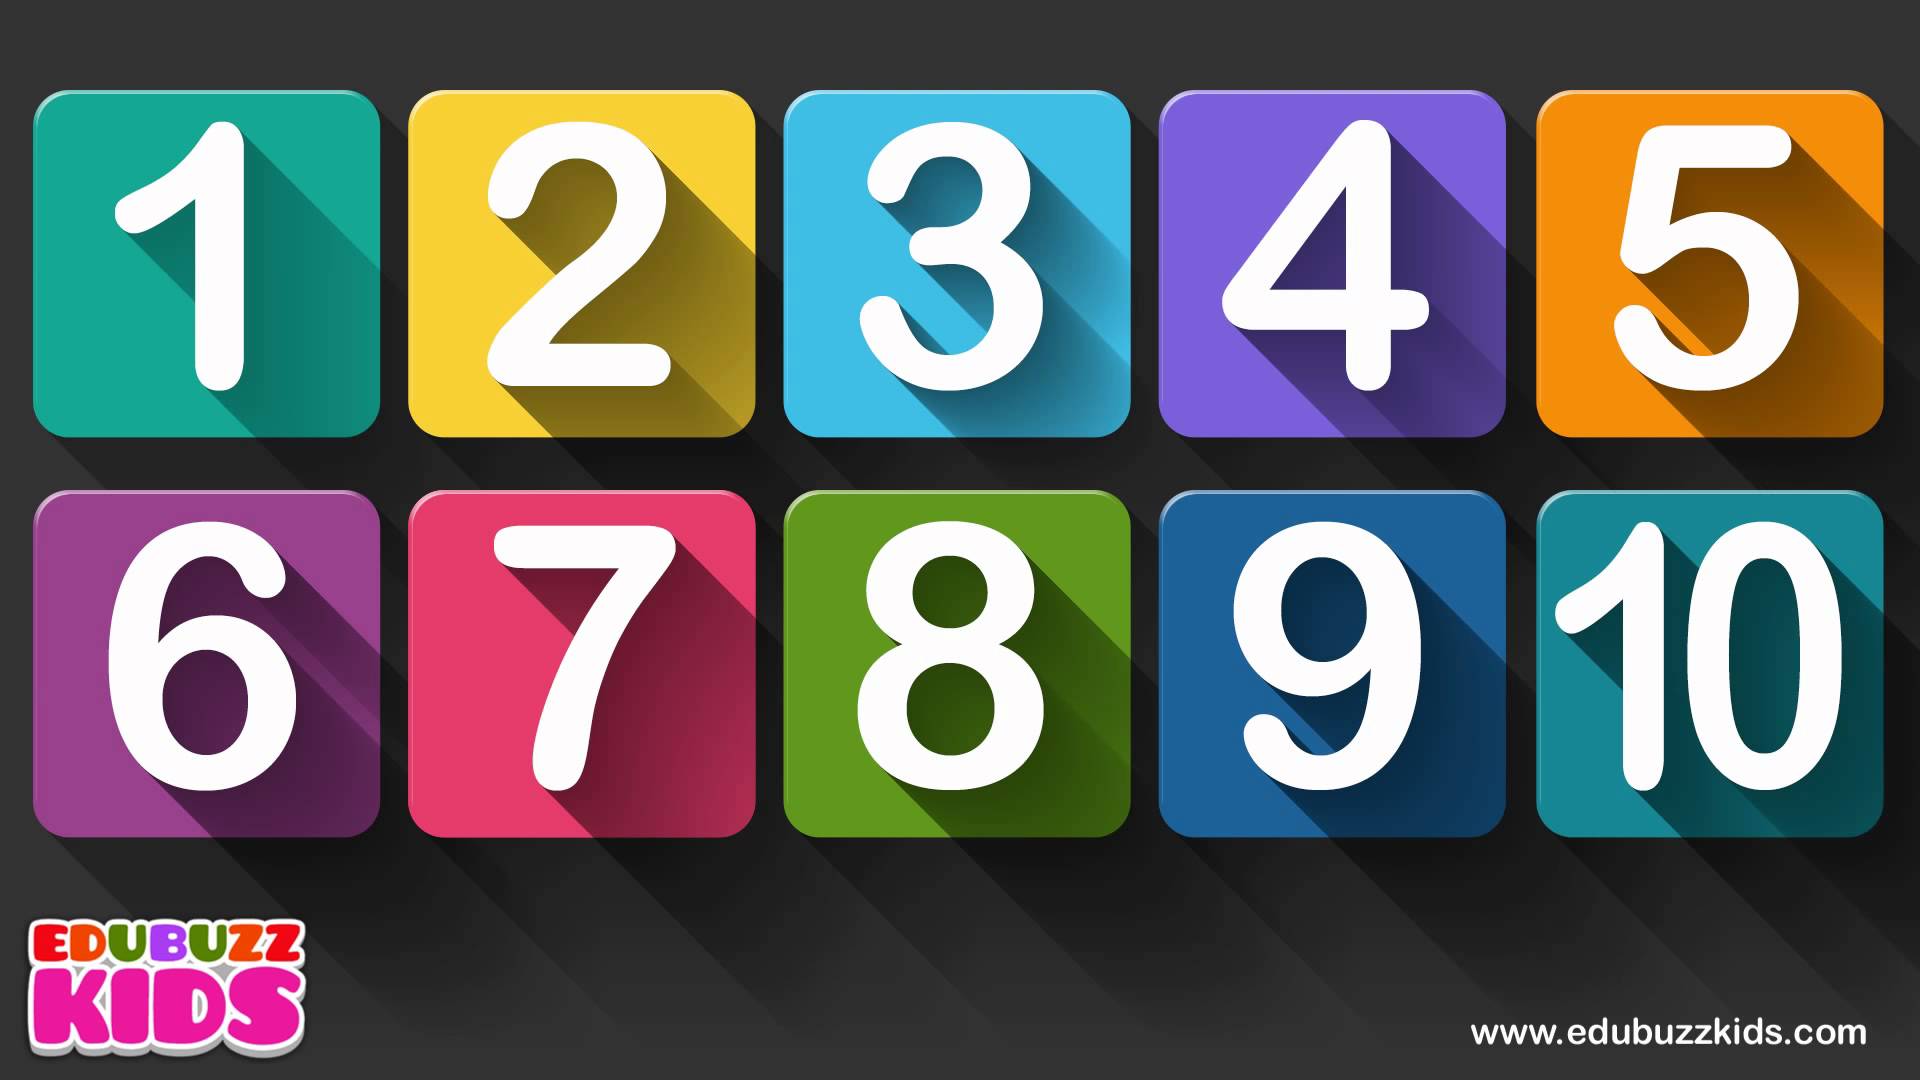 Amazing Numbers Pictures & Backgrounds